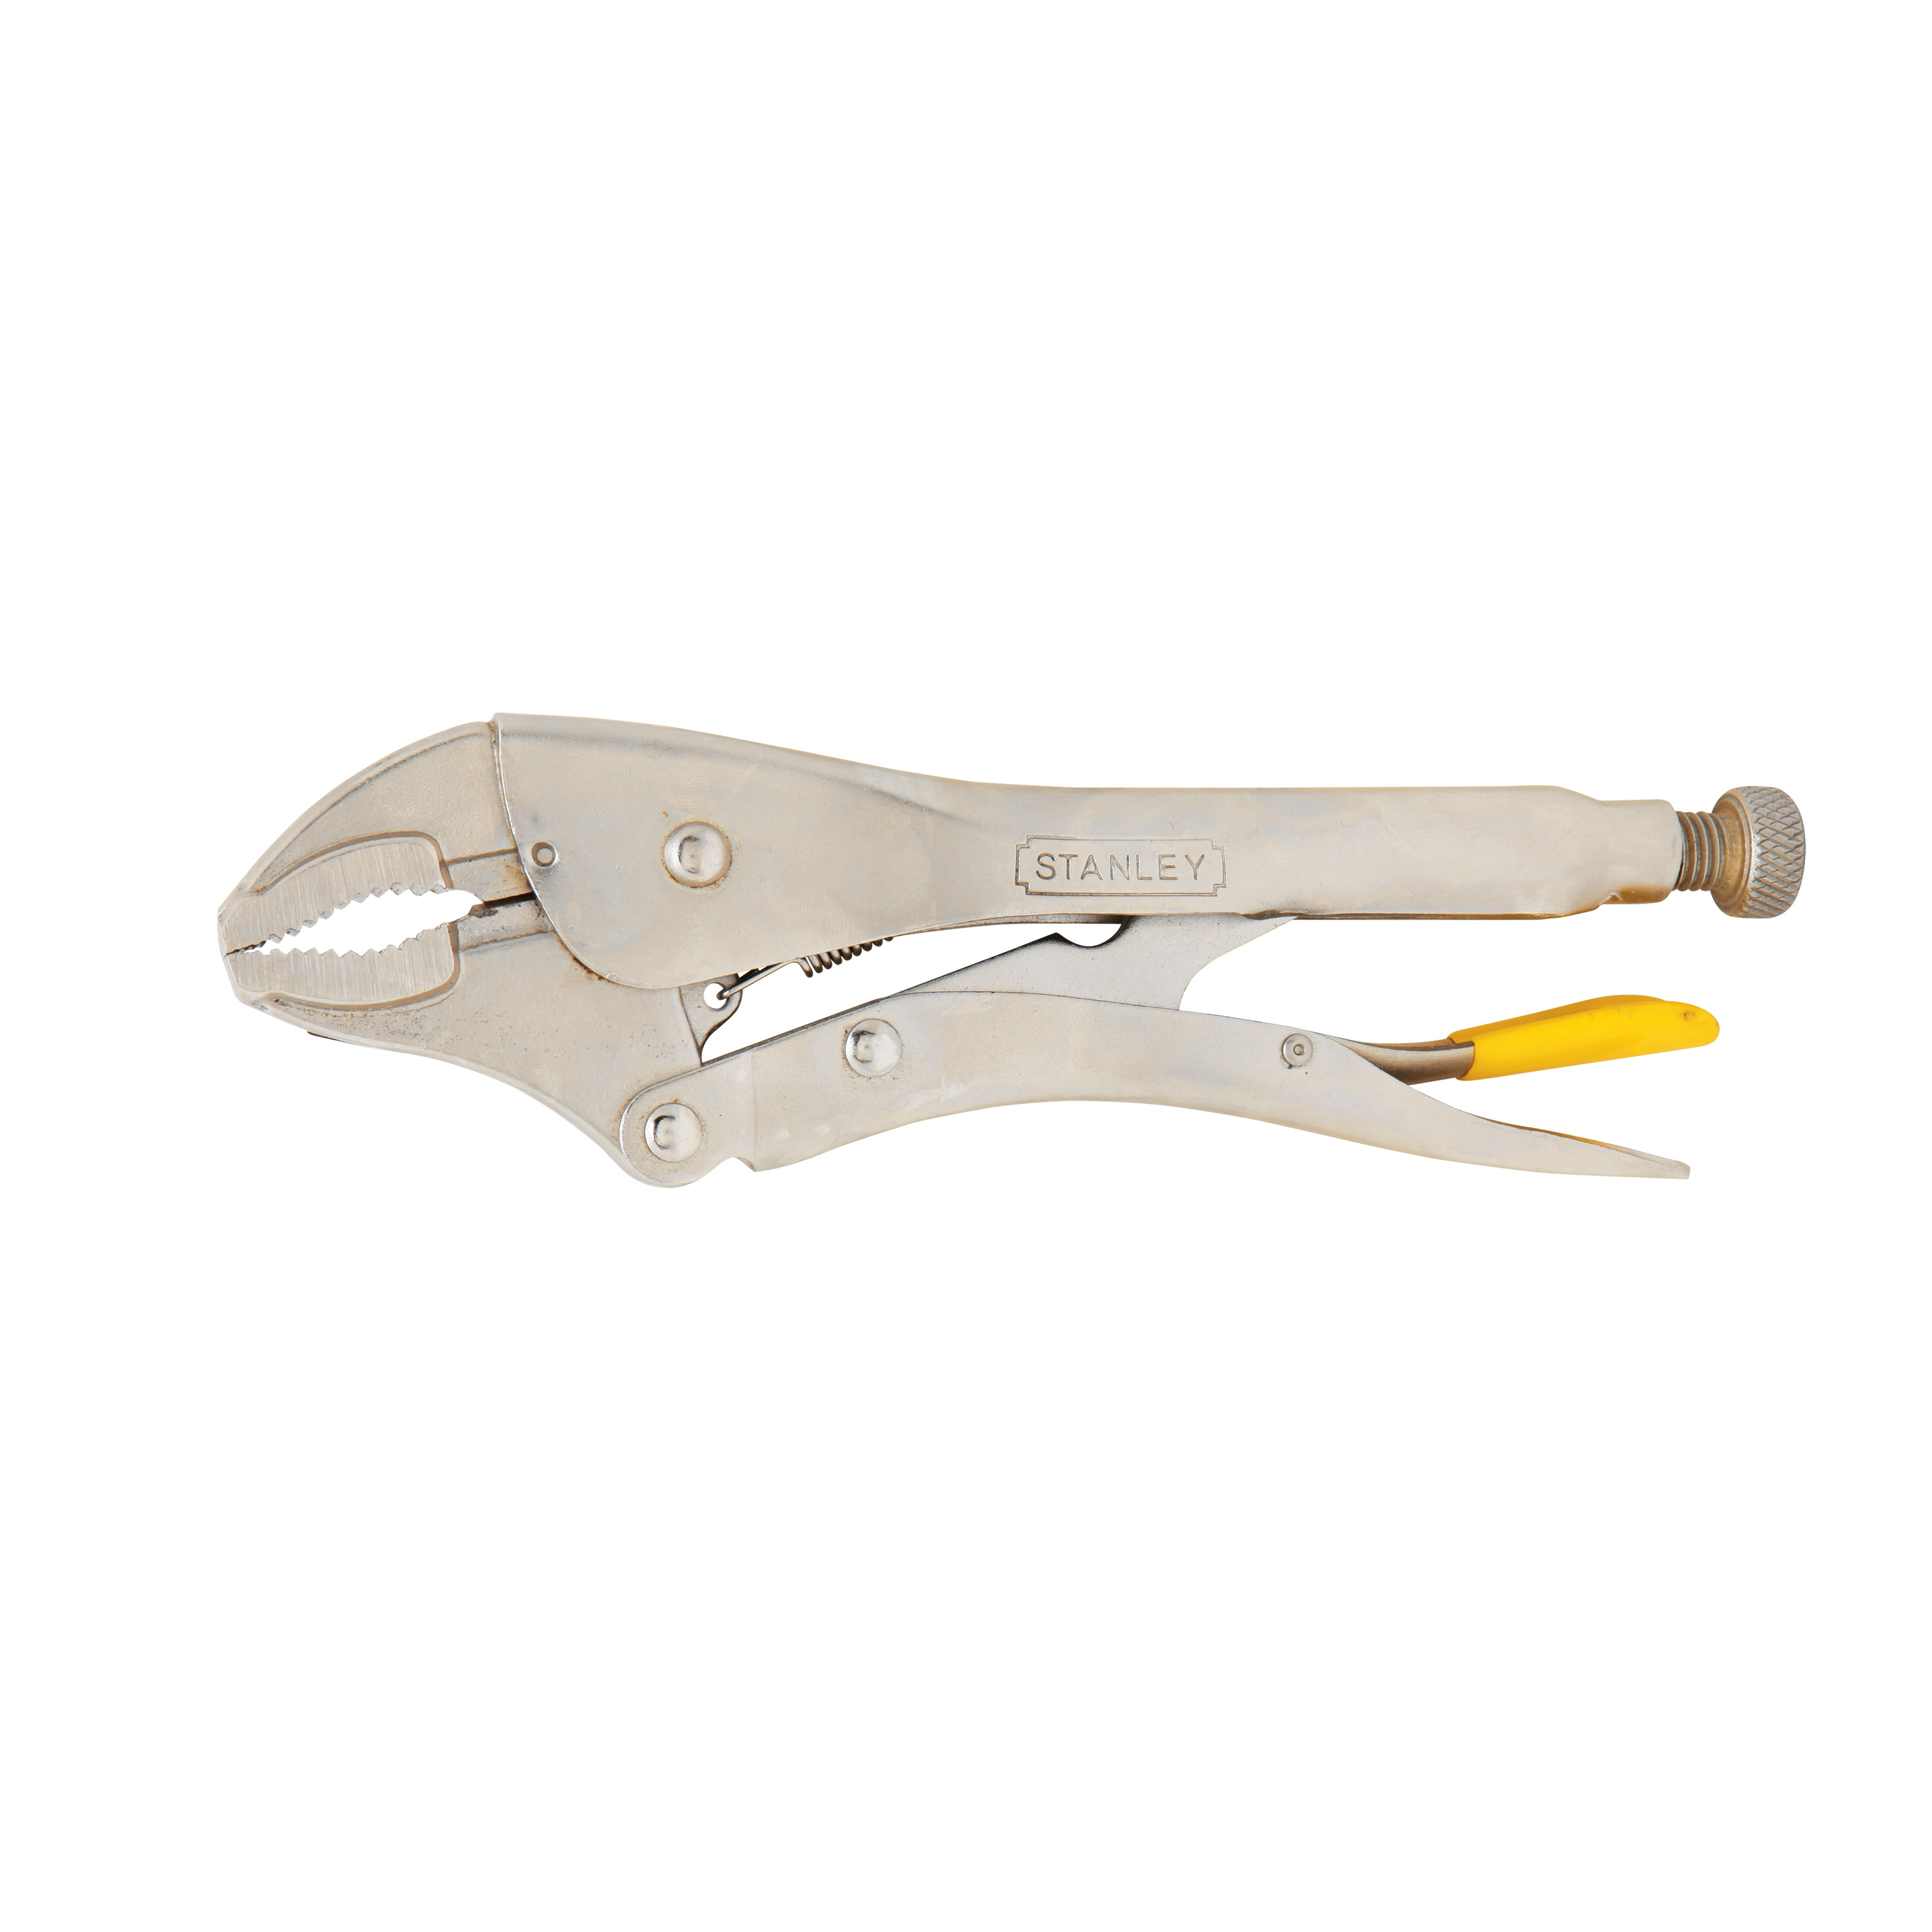 STANLEY 84-809 9-Inch Locking Pliers - image 2 of 4